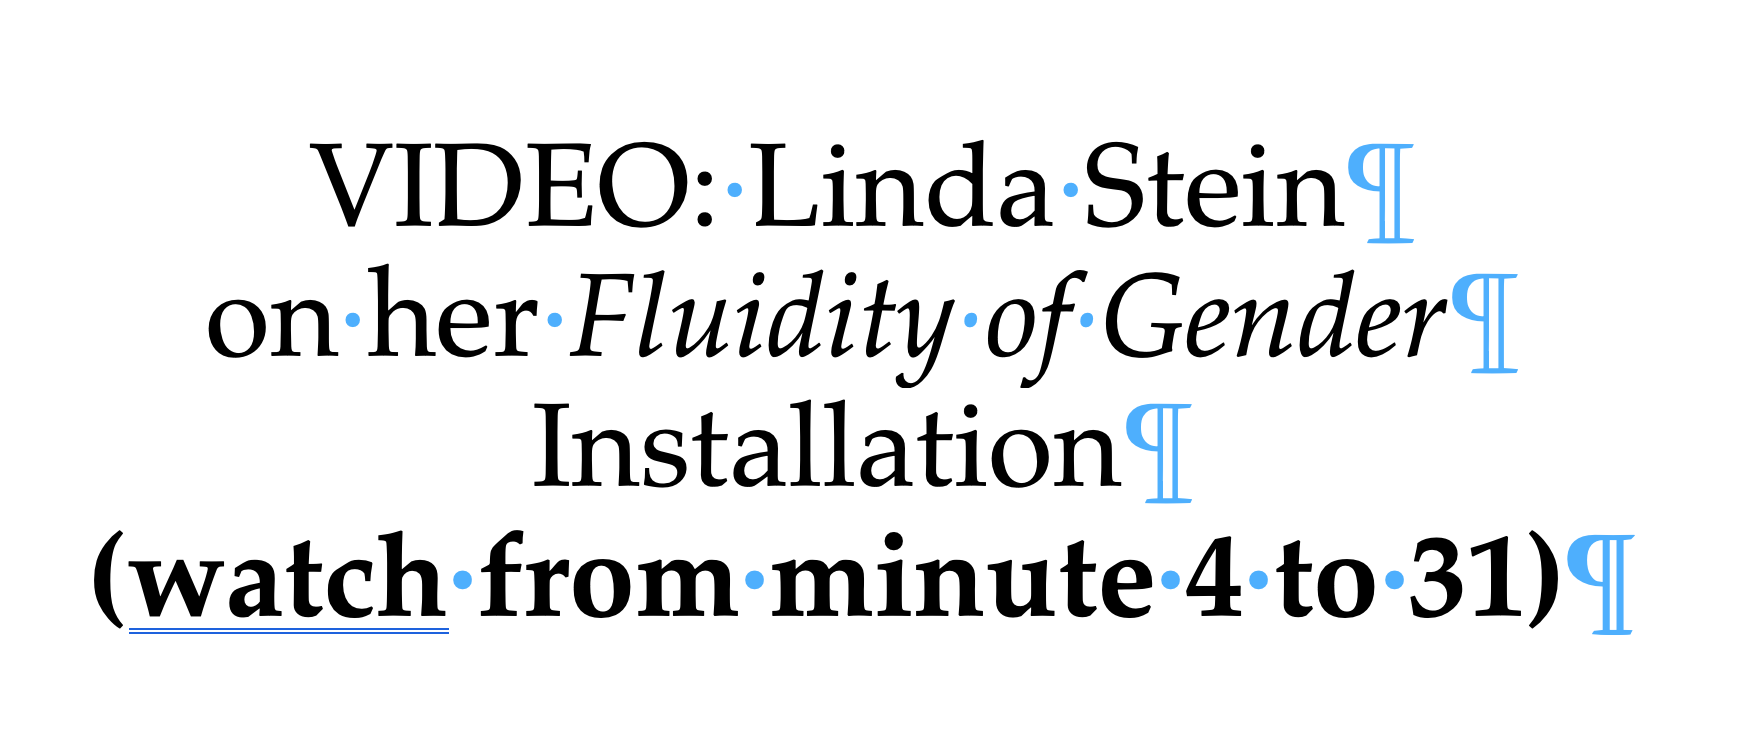 VIDEO: Linda Stein on her Fluidity of Gender Installation (watch from minute 4 to 31)